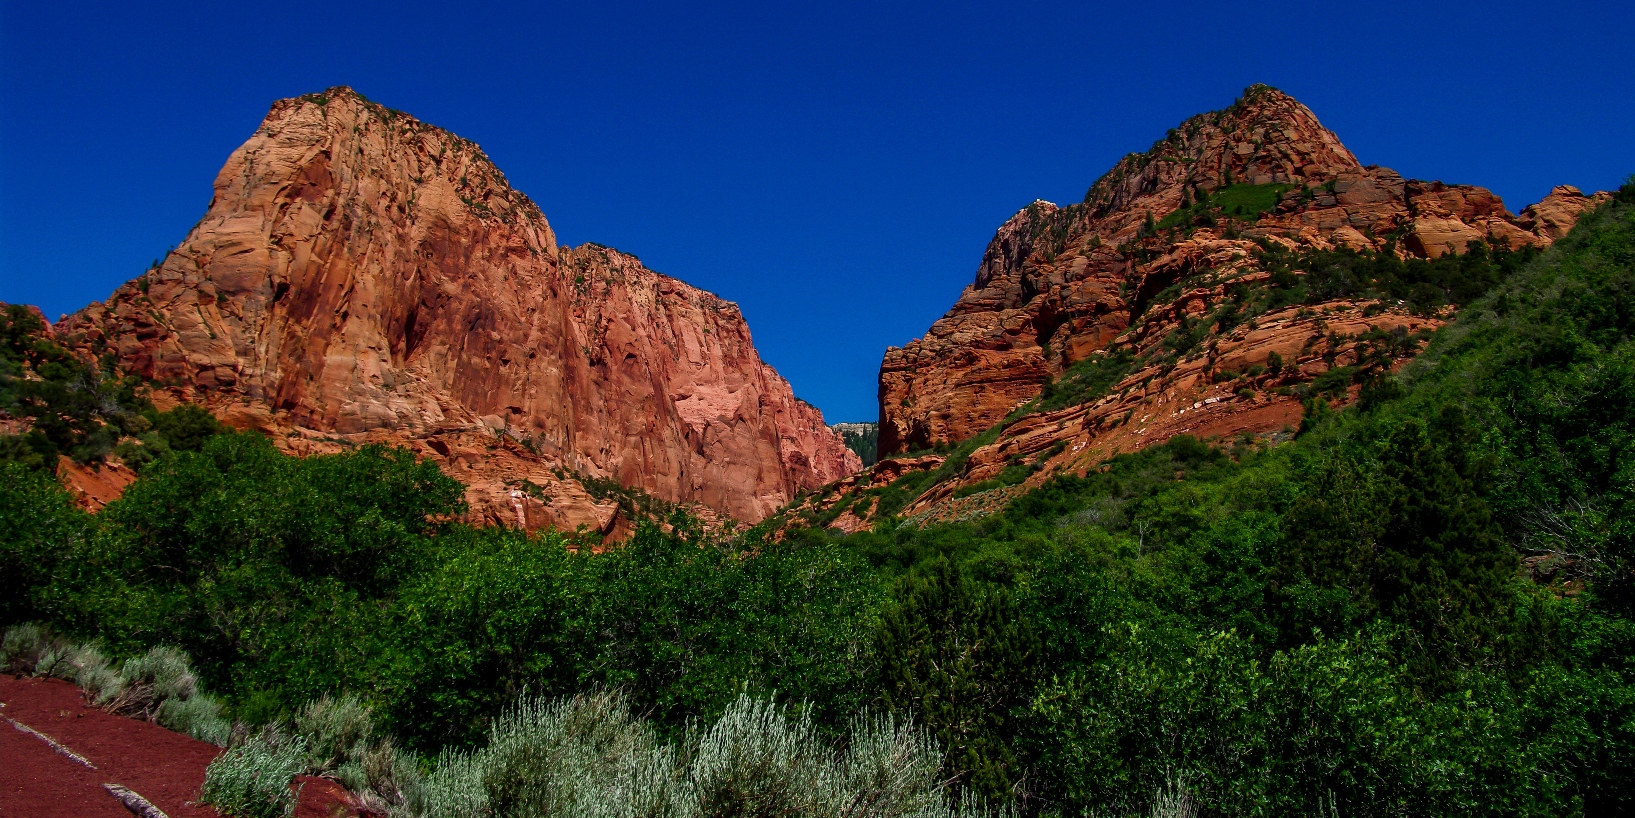 Massive Red Rock Formations In Kolob Canyon, Zion National Park, UT